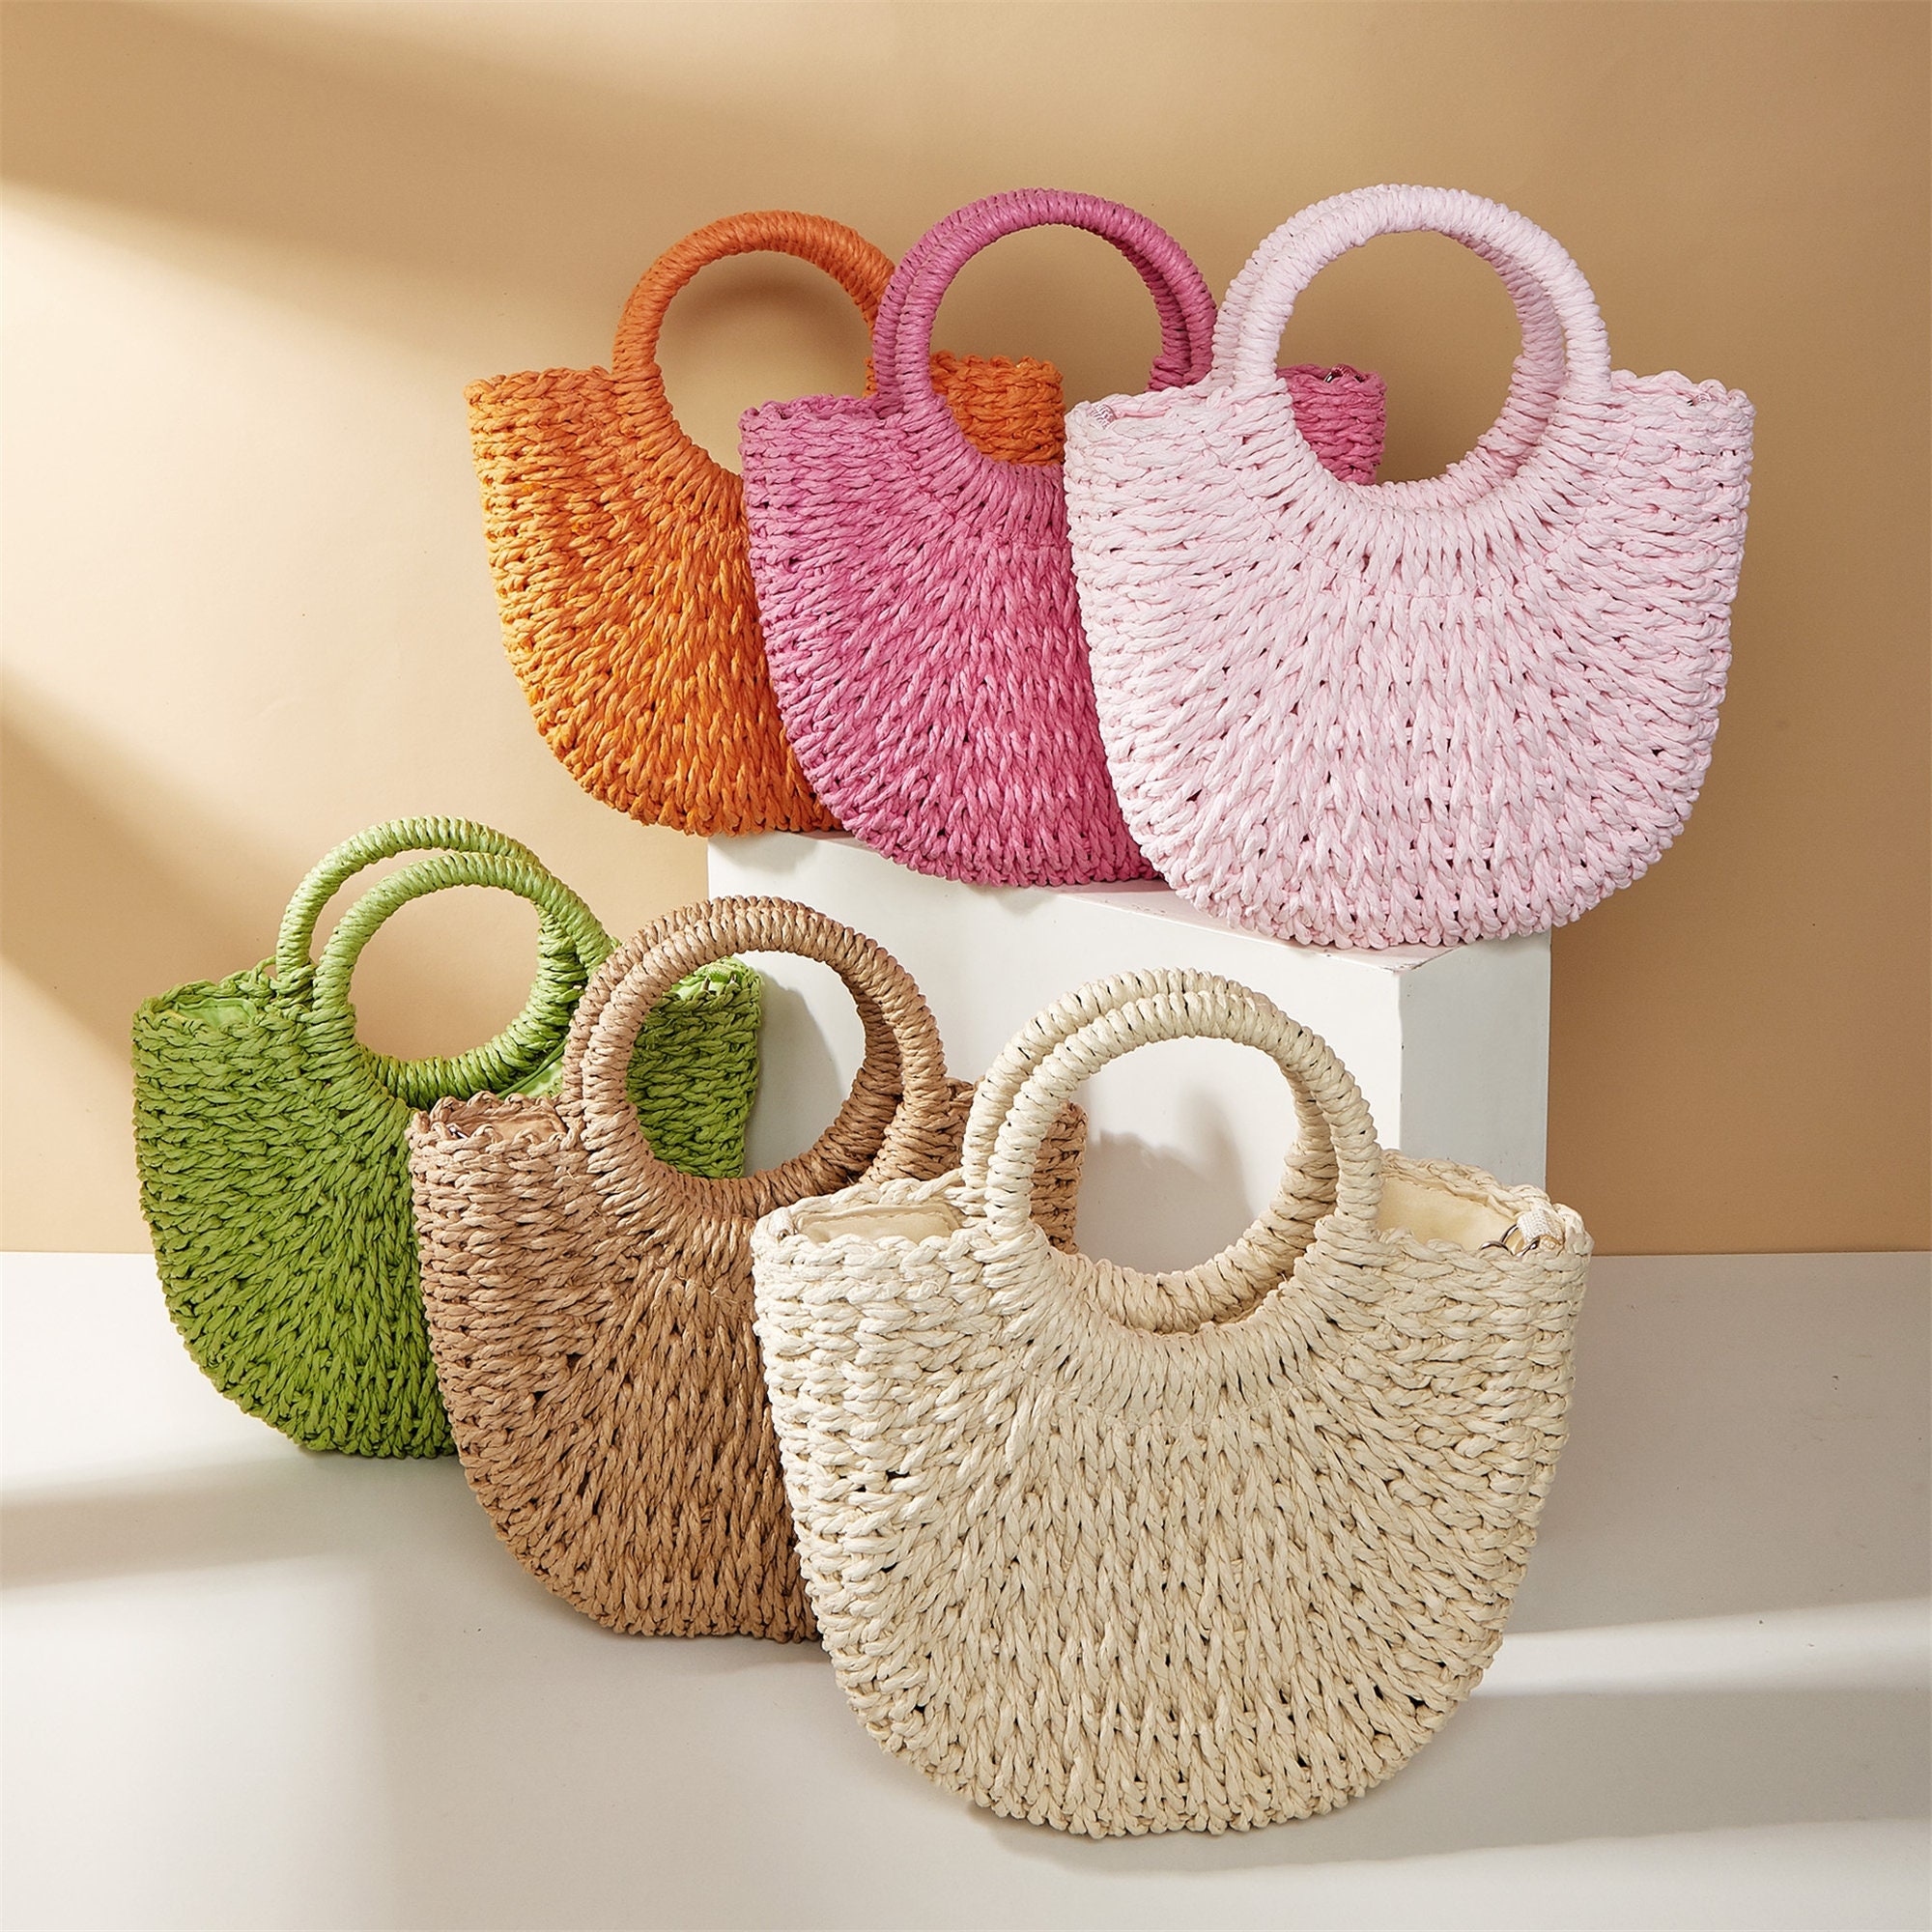 Buy Straw Bags for Women,Hand-woven Straw Large Hobo Bag Round Handle Ring  Tote Retro Summer Beach Rattan bag at Amazon.in